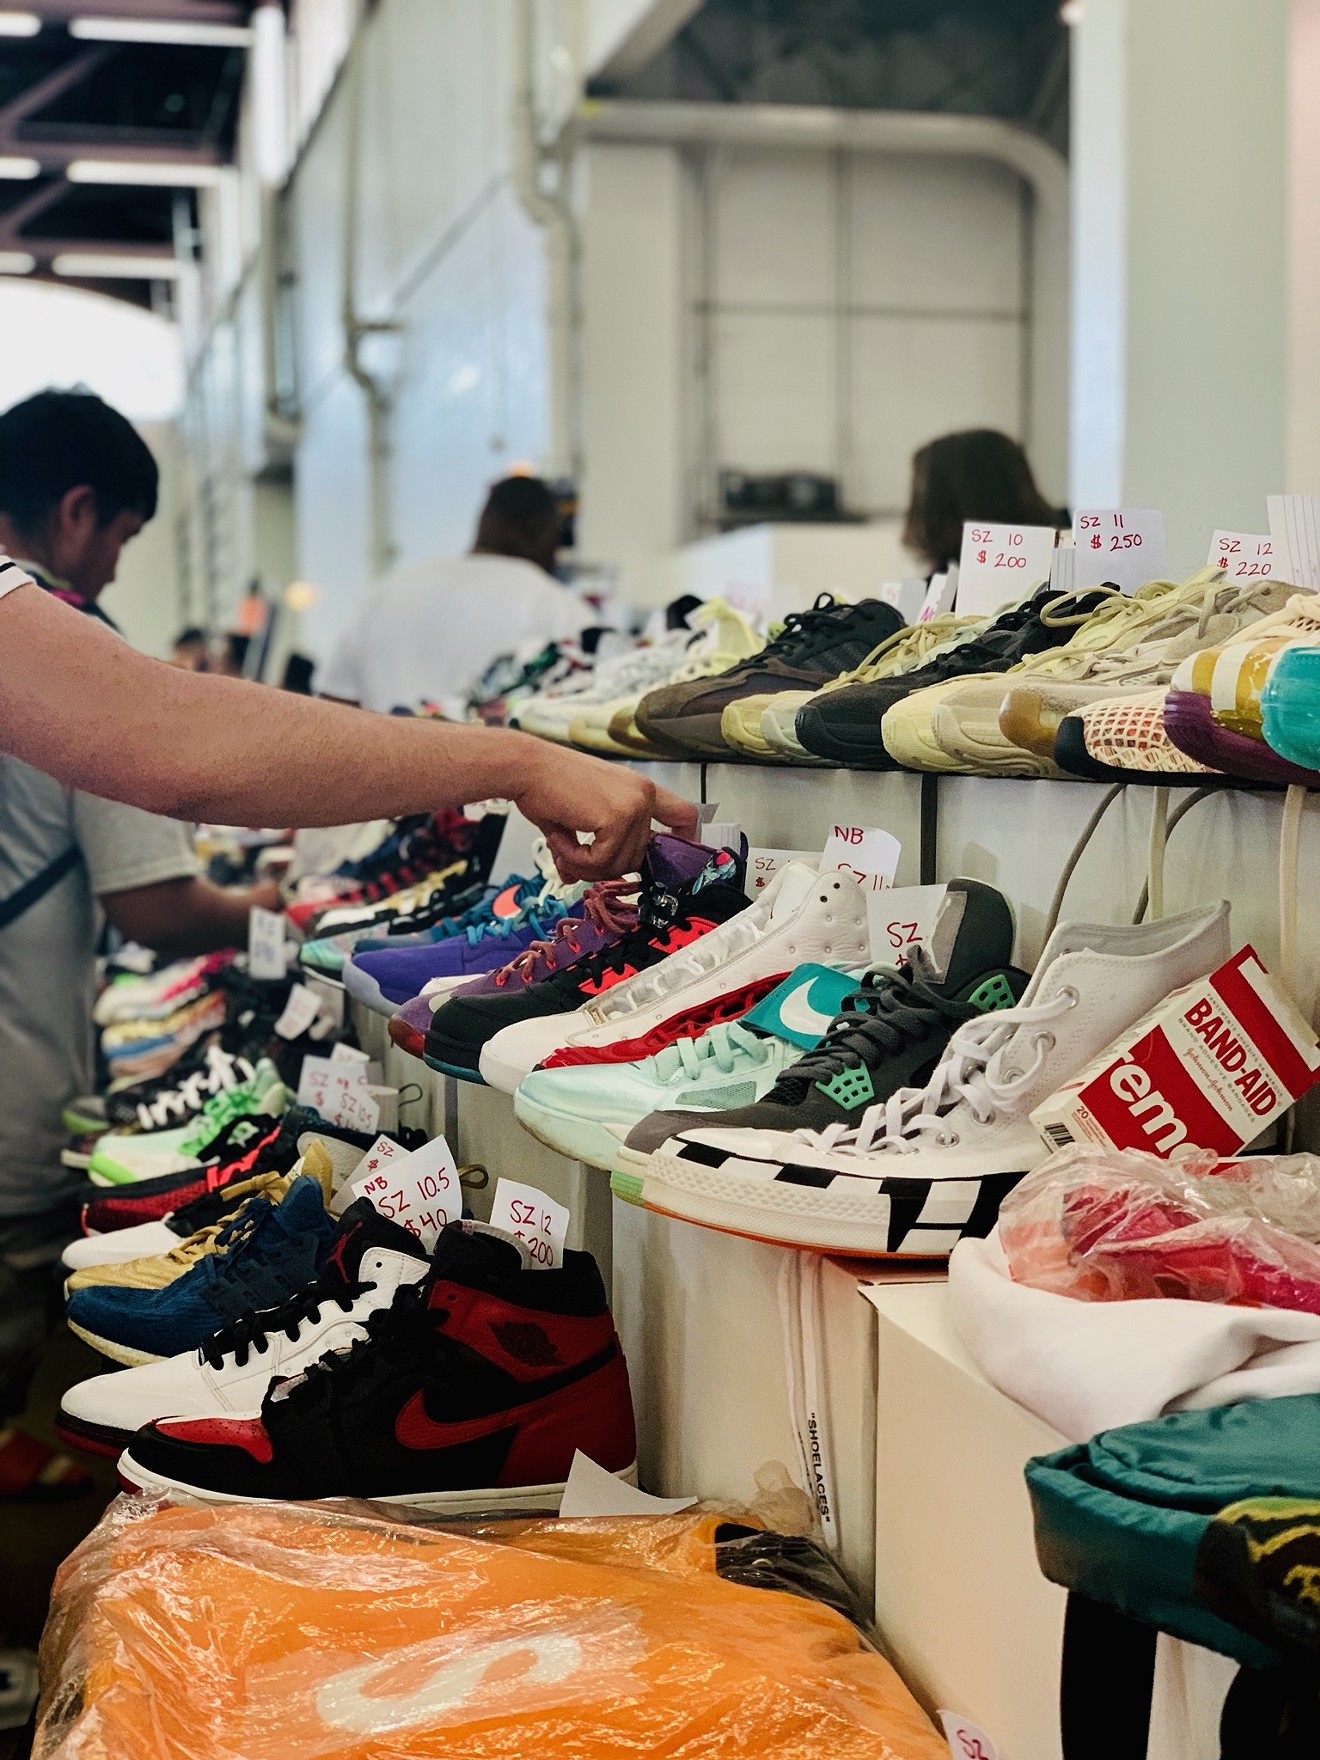 The smell of new and expensive sneakers is intoxicating at the Dallas Sneaker Con.